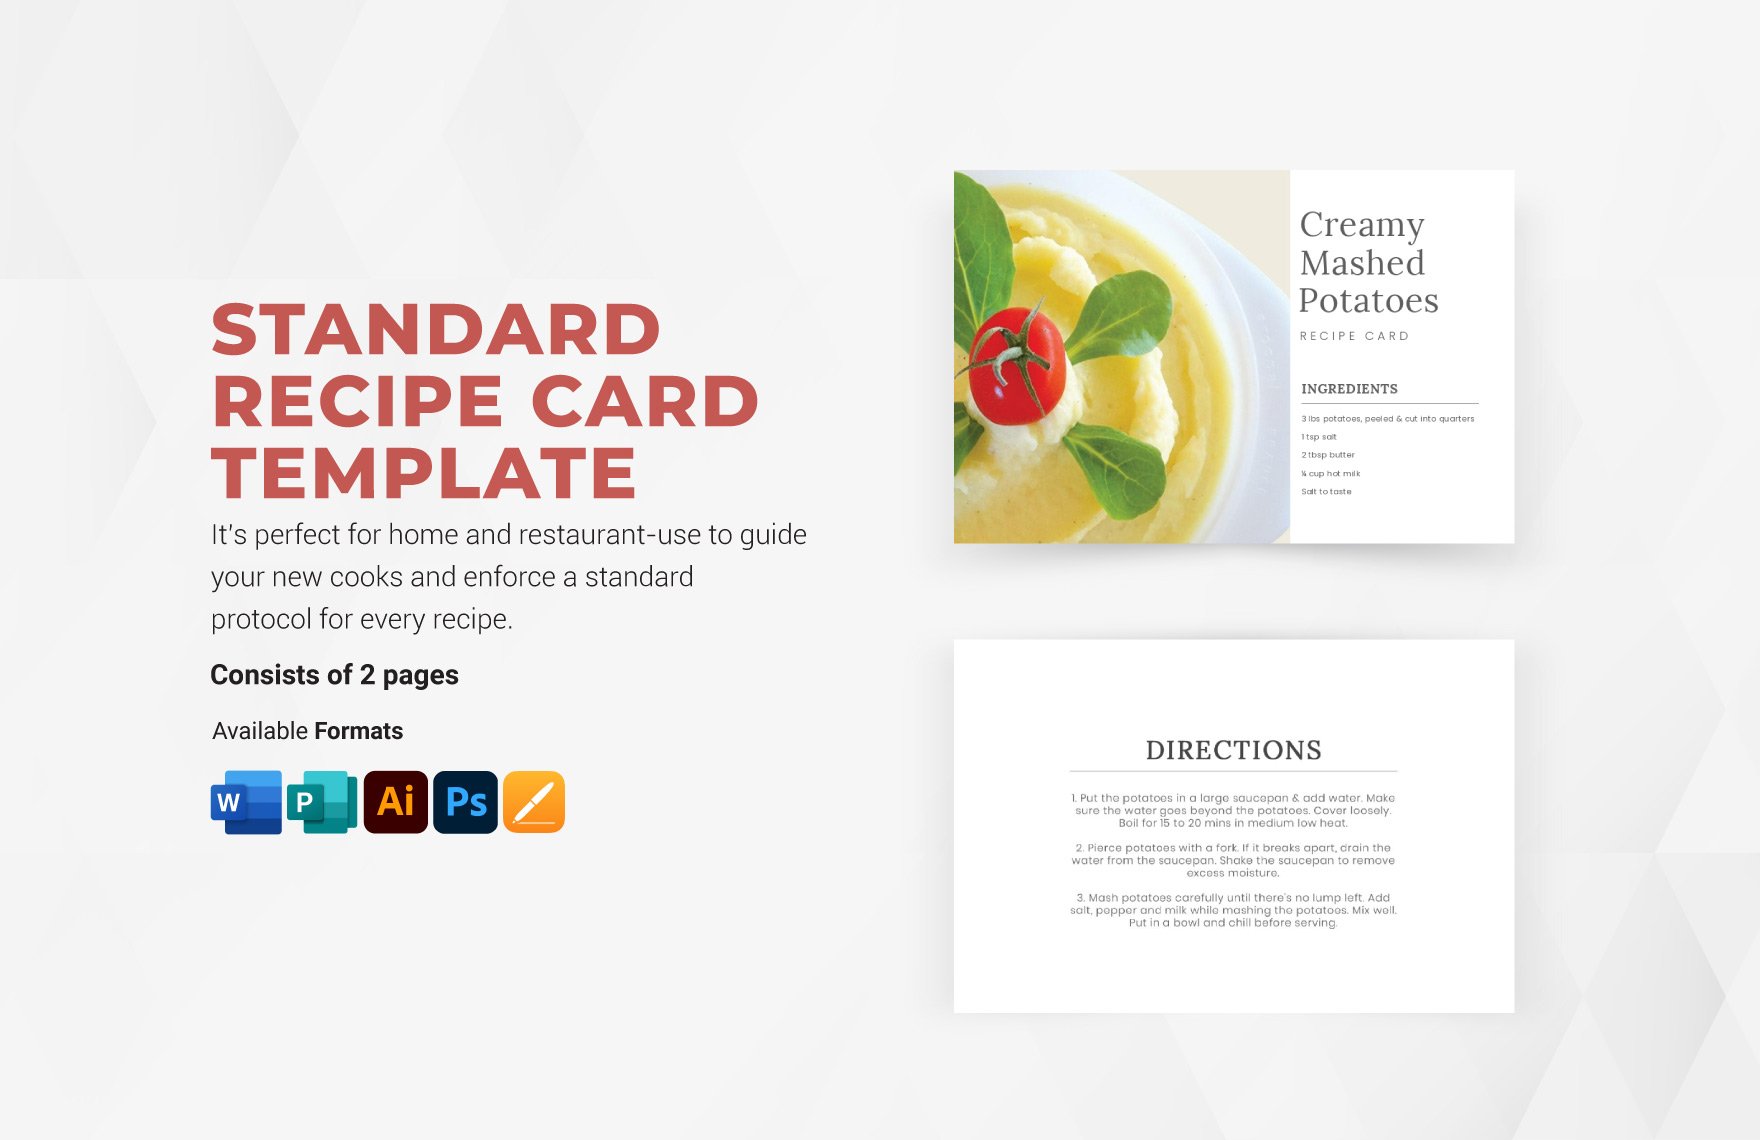 Standard Recipe Card Template in Word, Illustrator, PSD, Apple Pages, Publisher